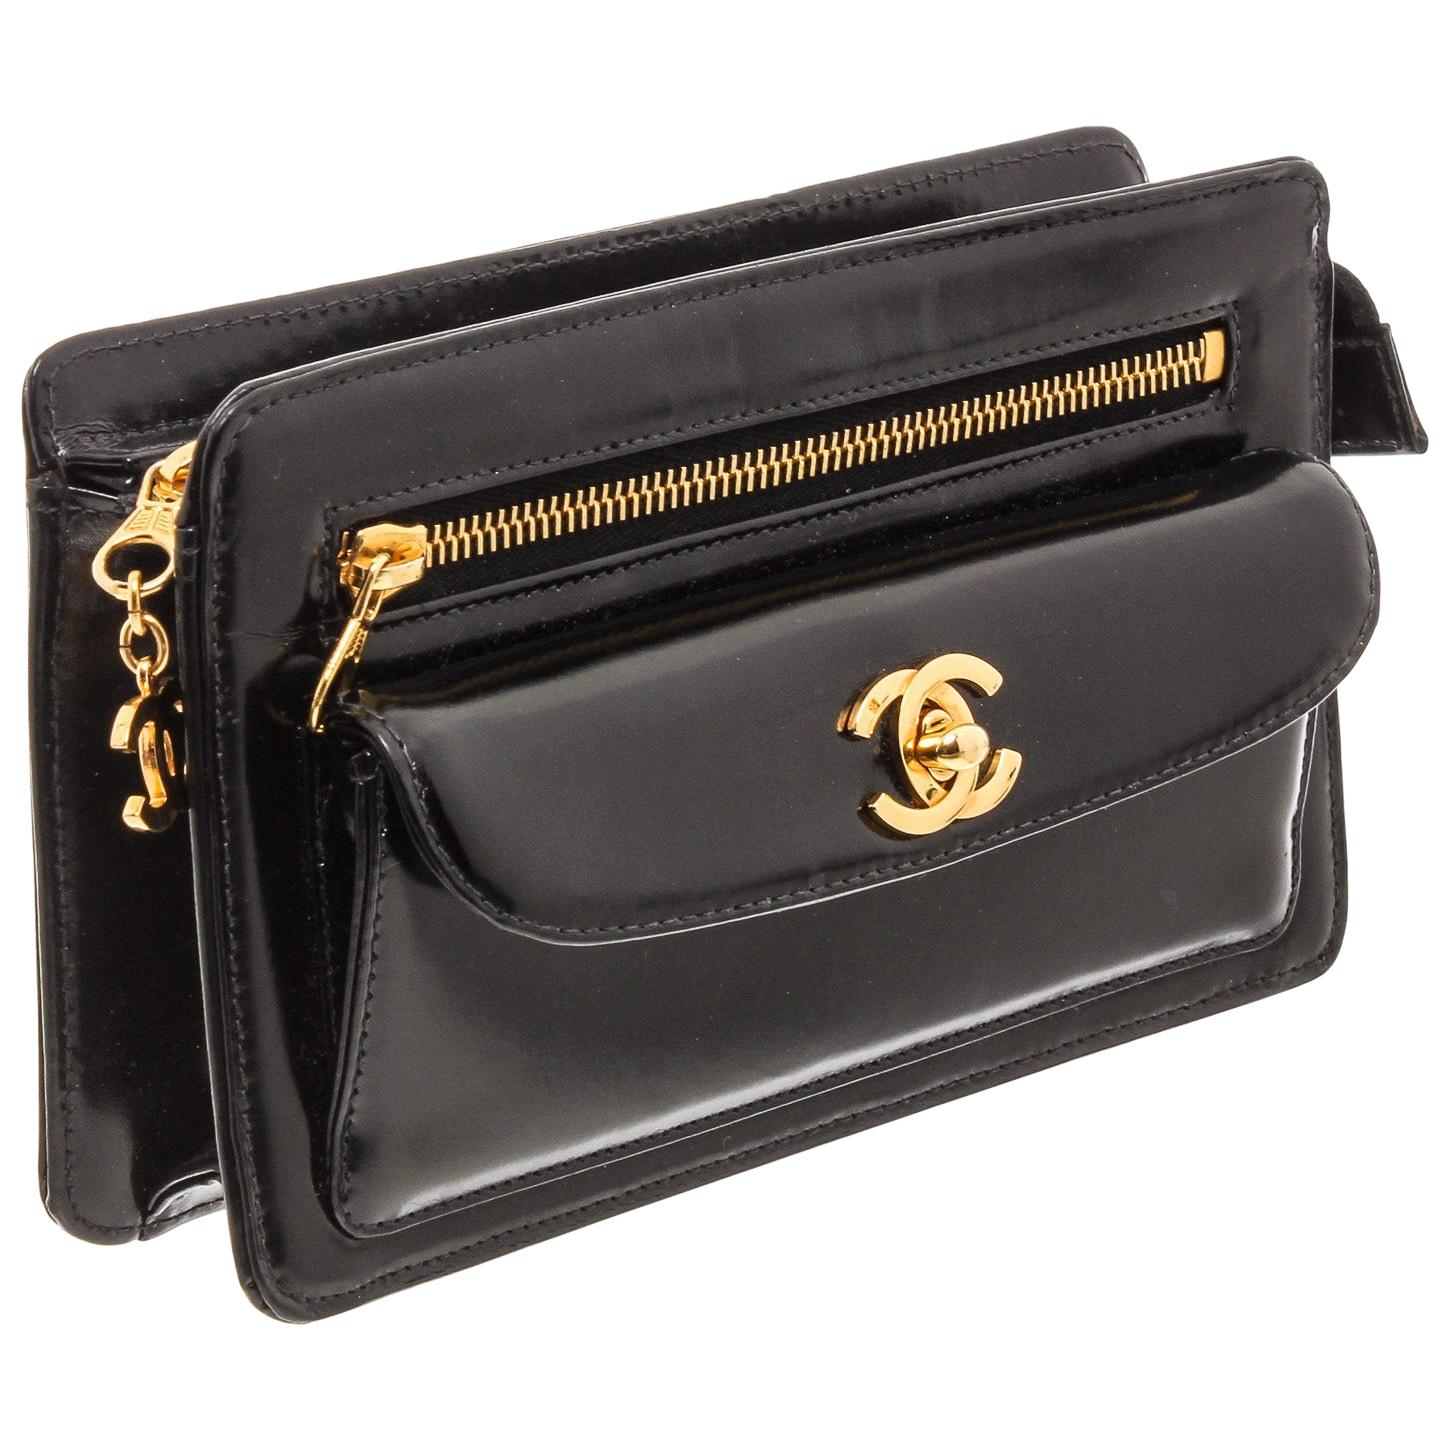 Patent leather clutch bag Chanel Black in Patent leather - 20319037